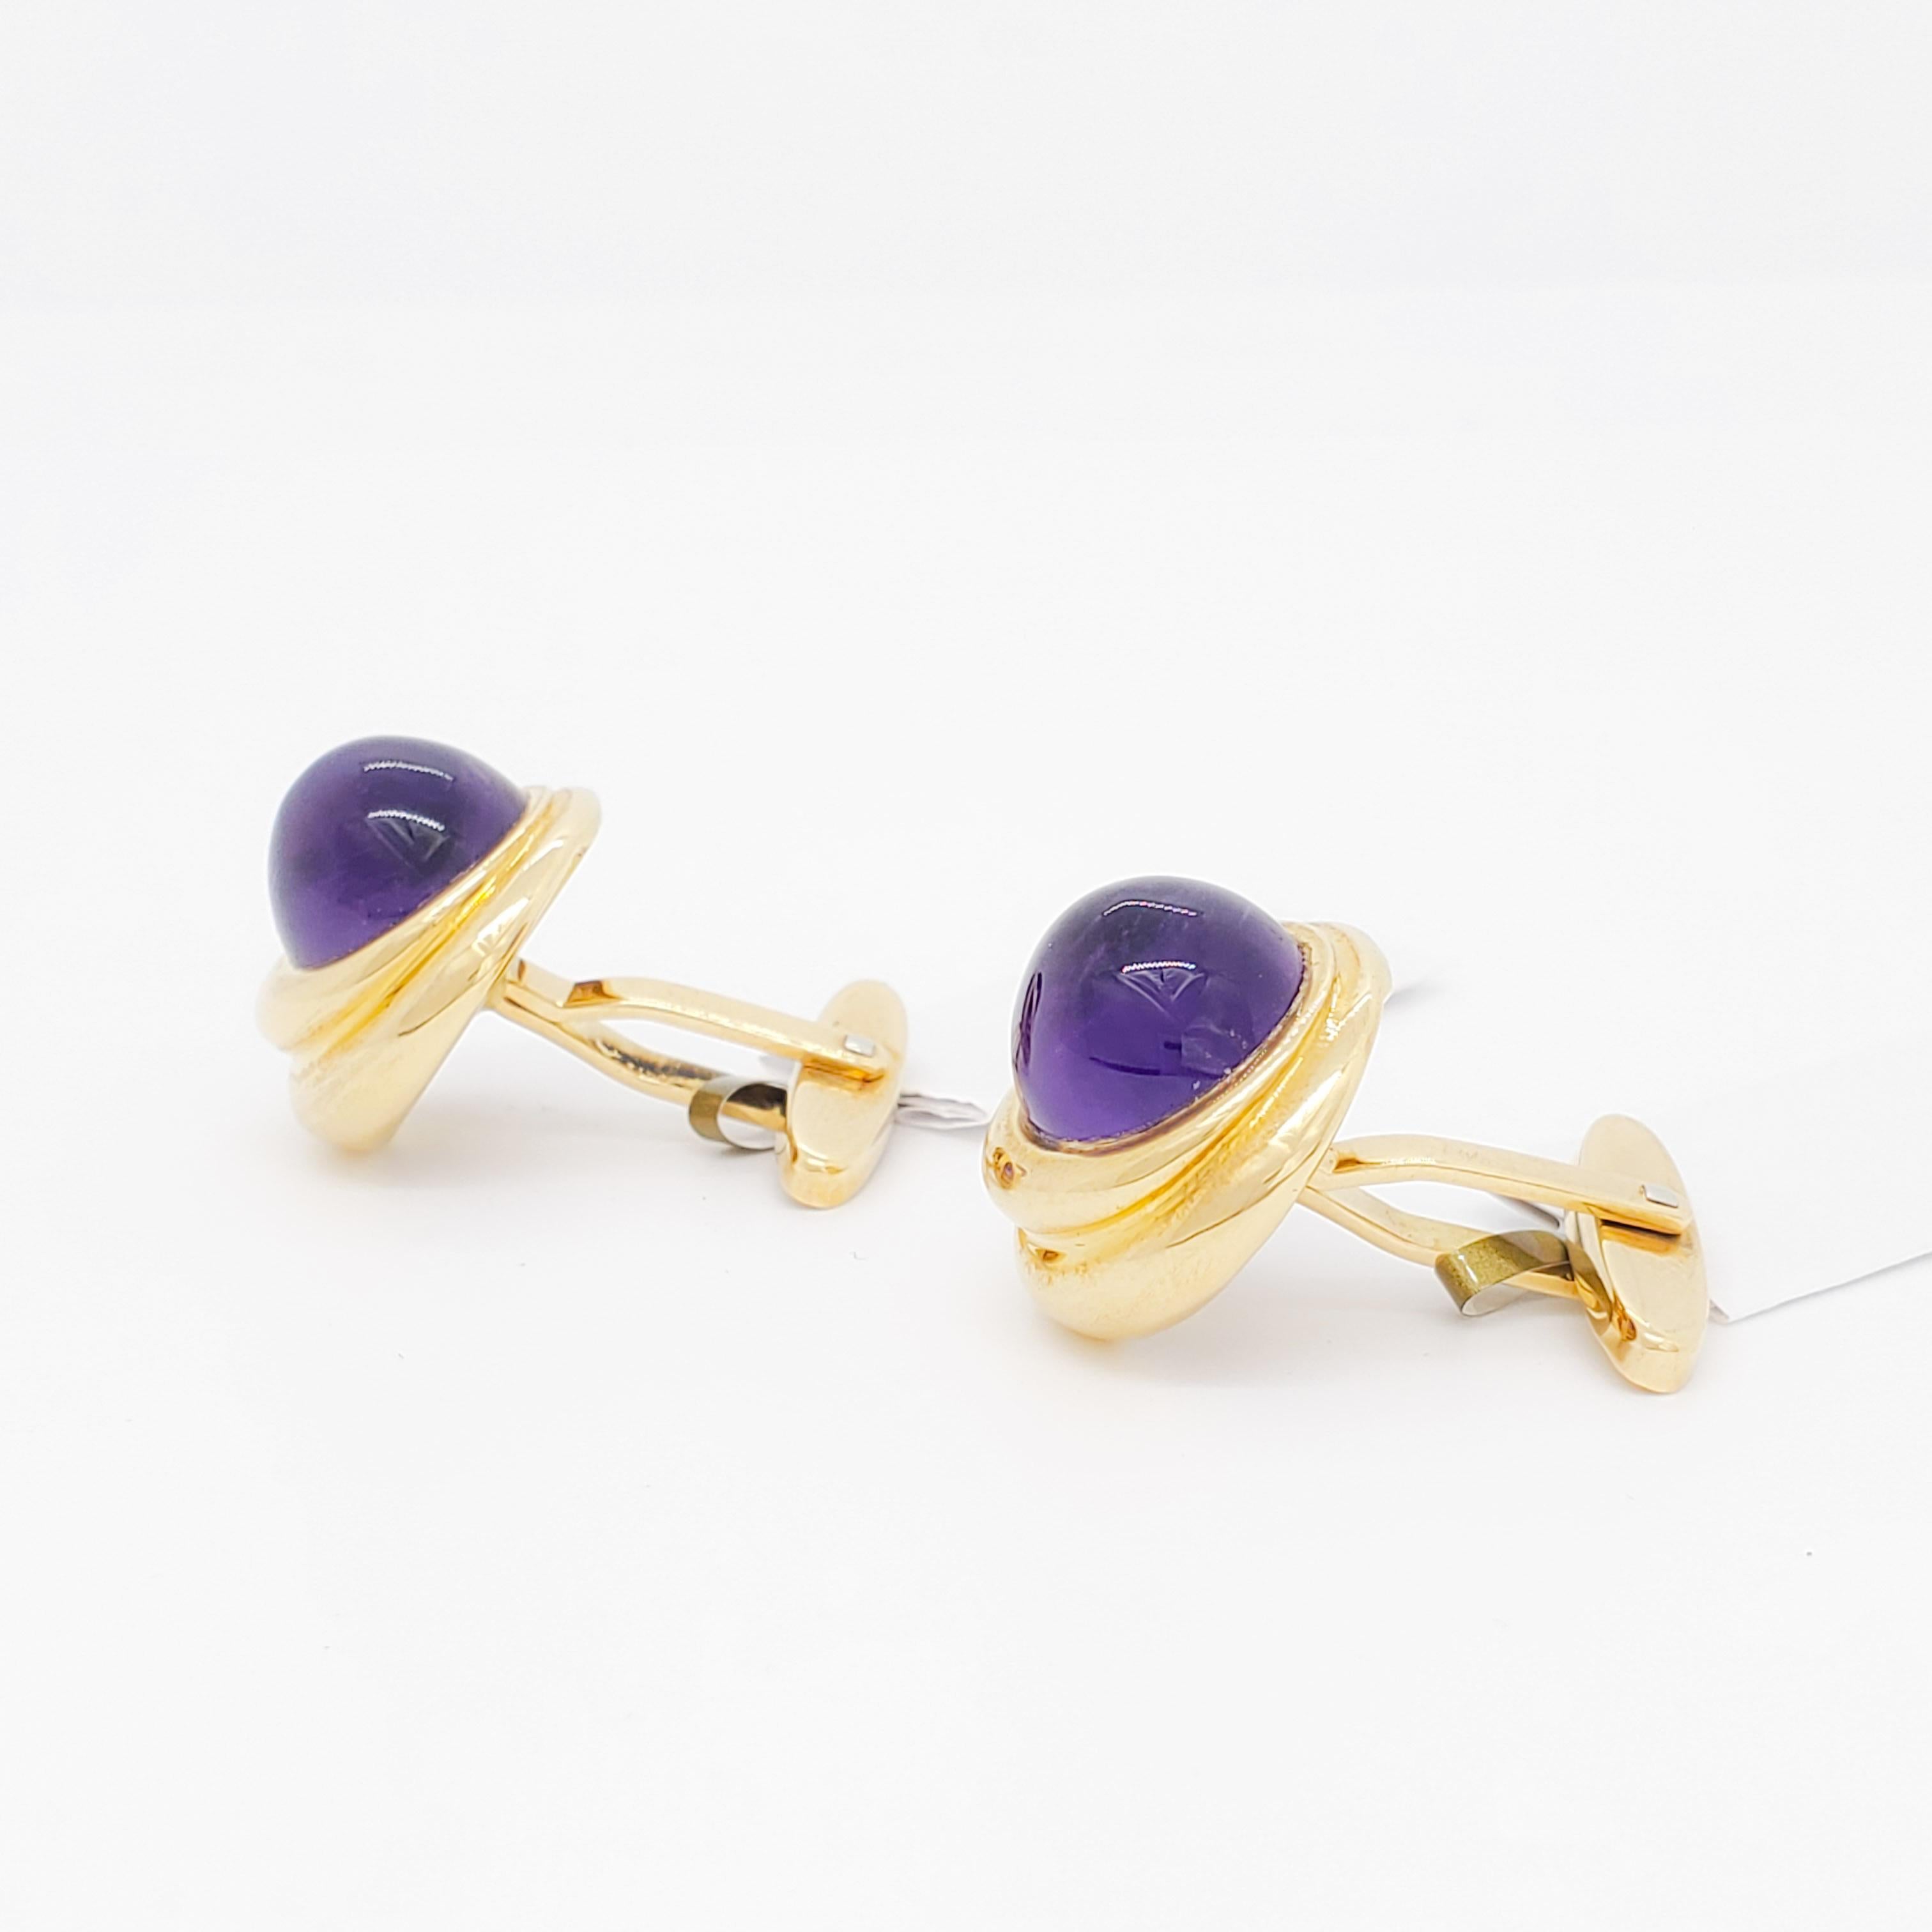 Round Cut Amethyst Round Cabochon Cufflinks in 18k Yellow Gold For Sale